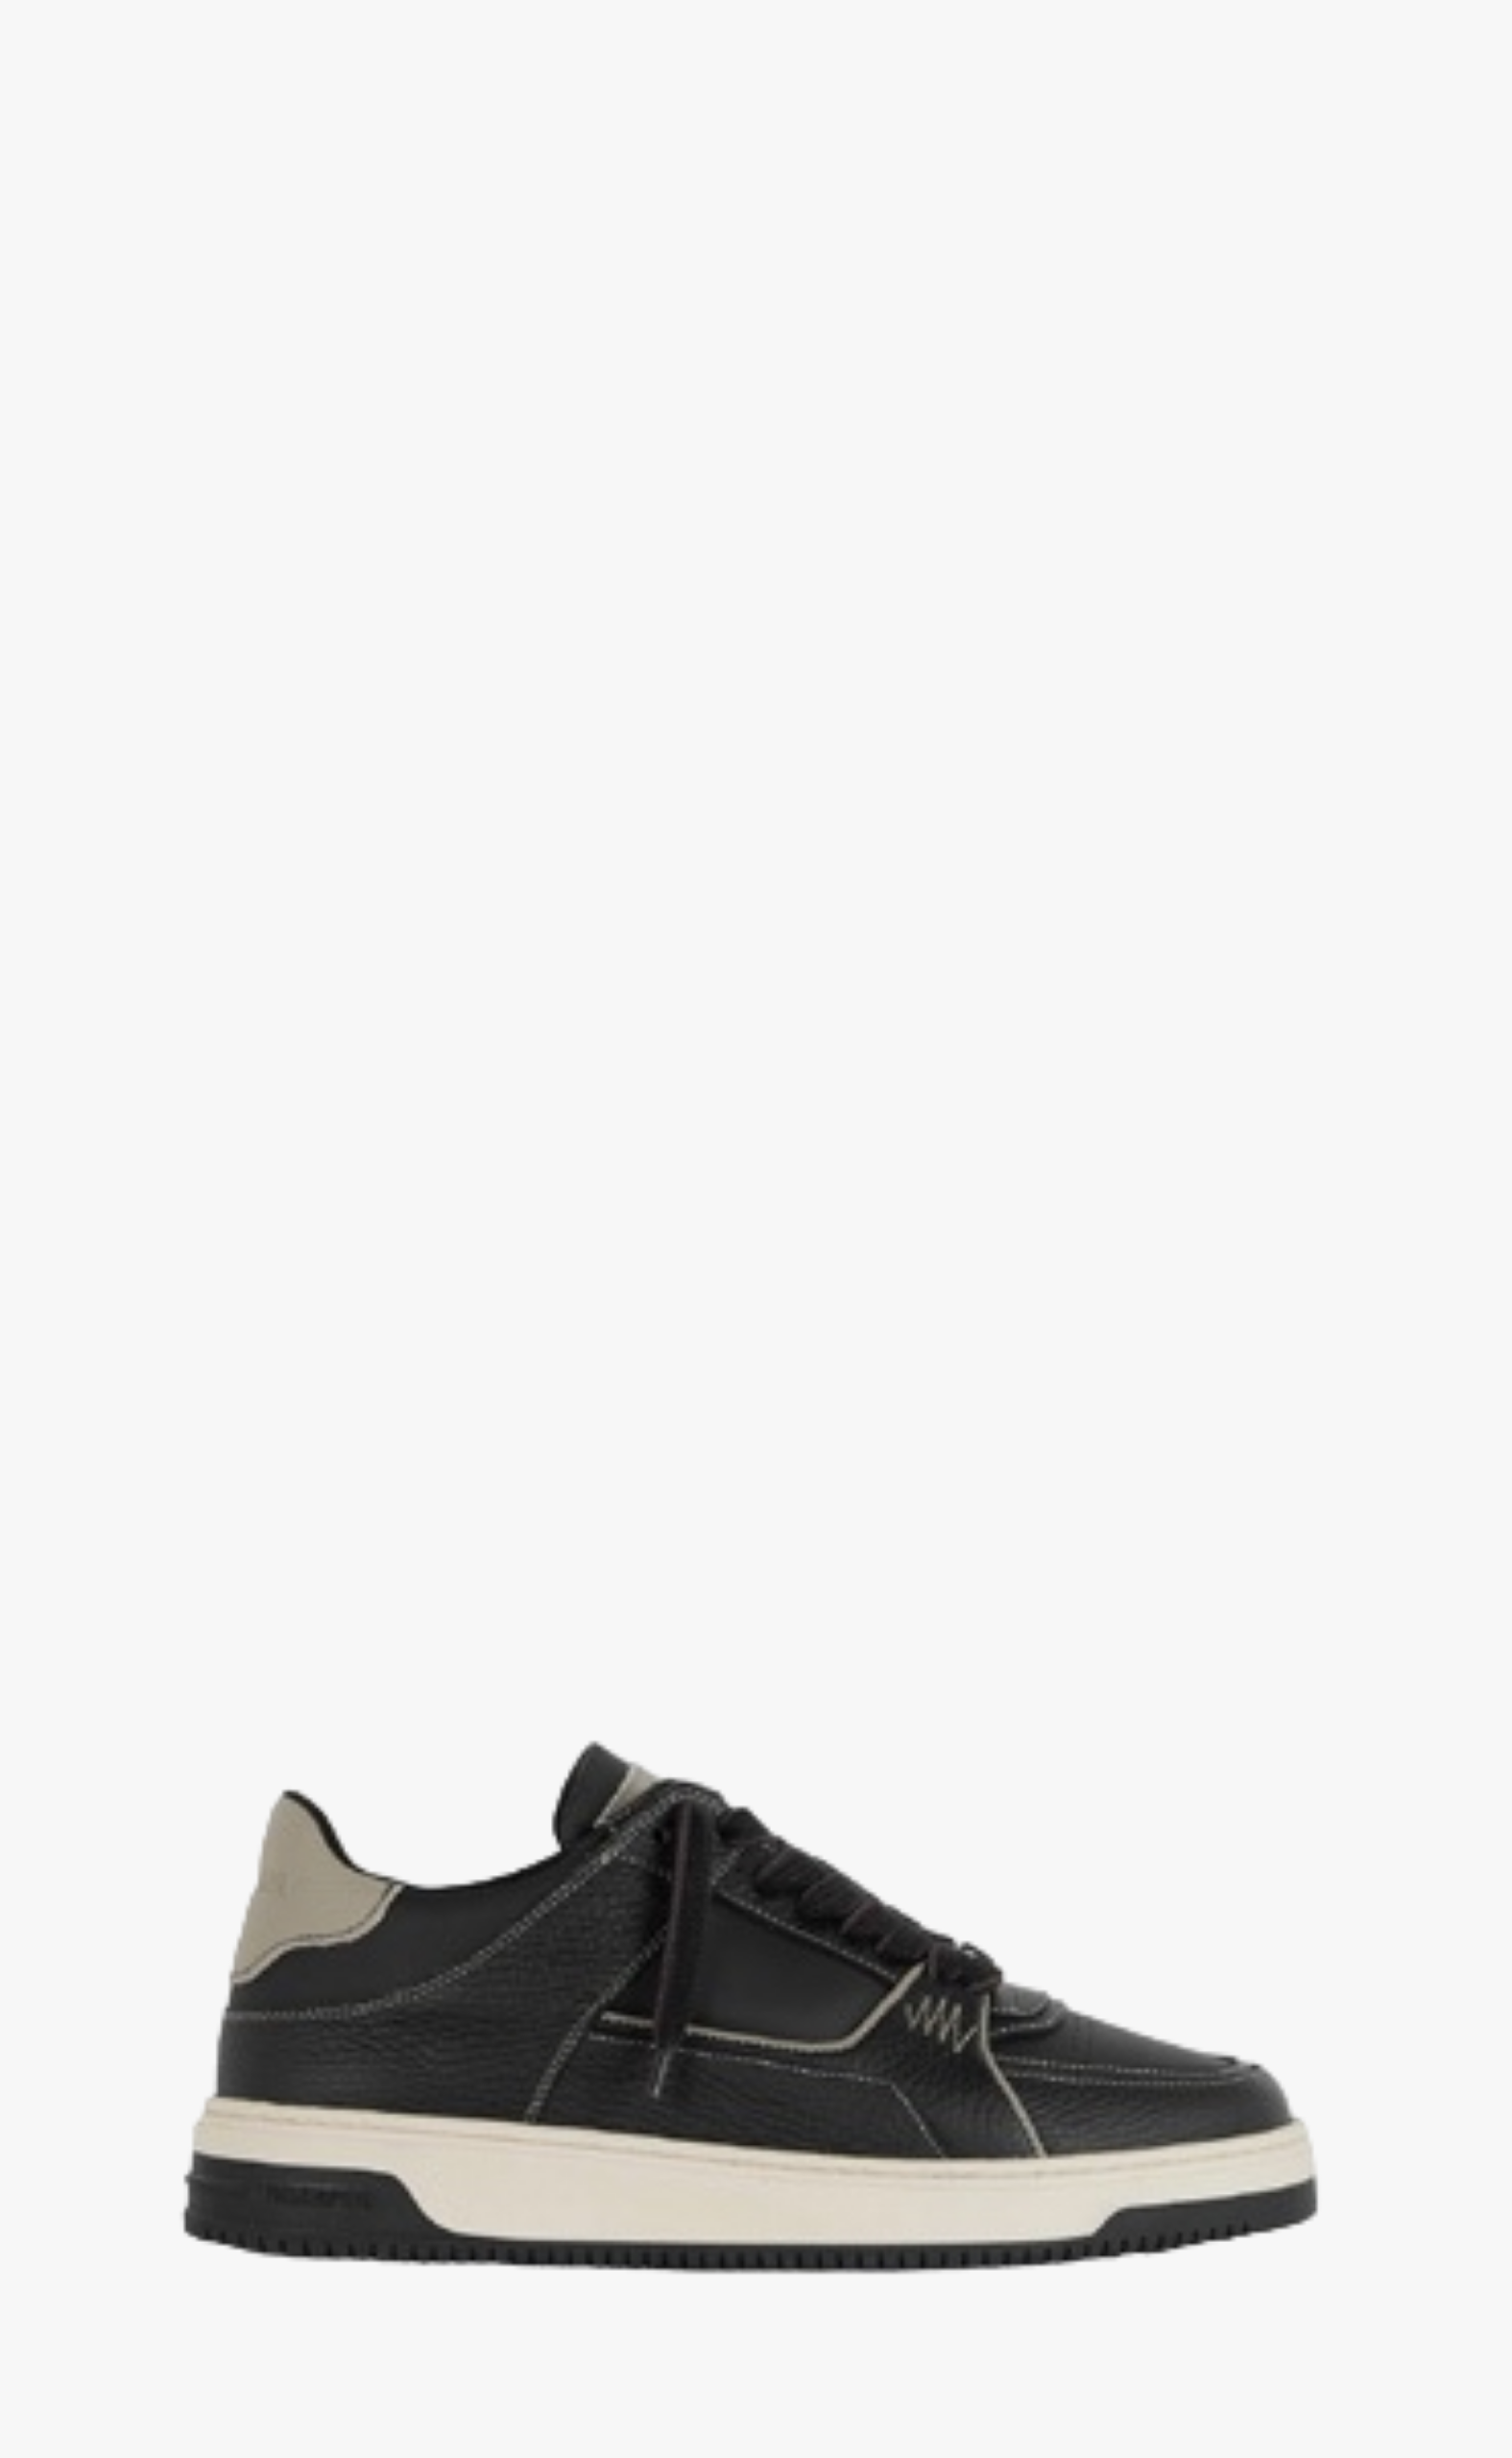 APEX BLACK WASHED TAUPE SNEAKERS